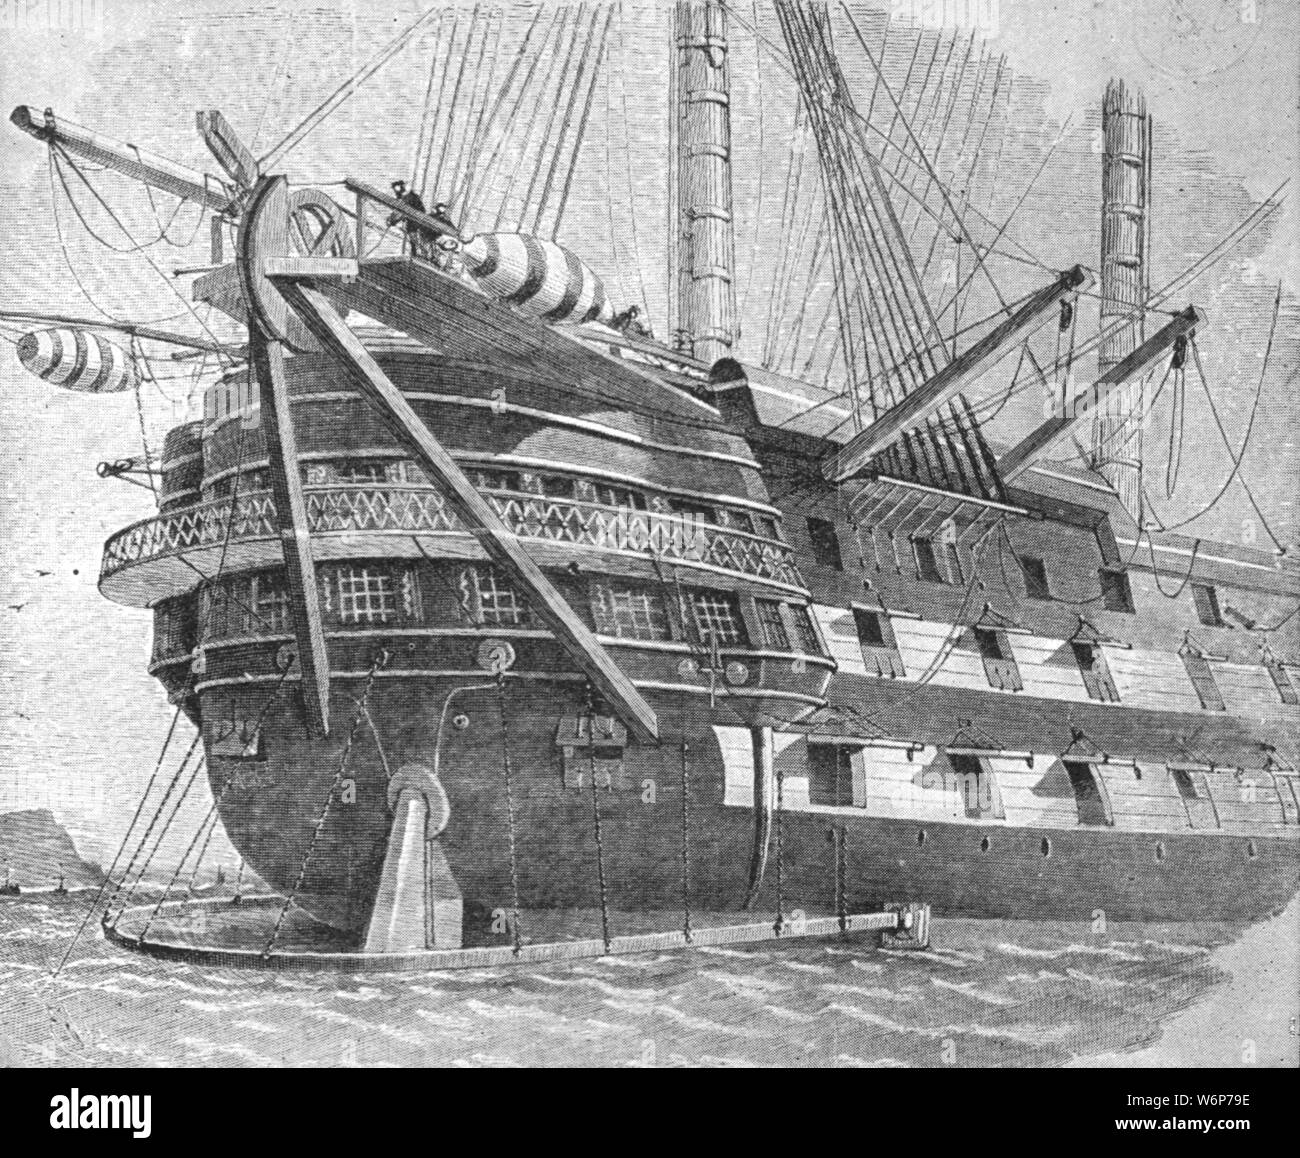 'The Laying of the Atlantic Cable, 1857: H.M.S. 'Agamemnon' fitted with the machine for passing the coil overboard', (1901). HMS 'Agamemnon' was the first warship to be built with screw propulsion. After being converted she was involved in the first attempts to lay the transatlantic telegraph cable in 1857-1858. The third attempt succeeded but the cable only remained operational for a few weeks before its insulation deteriorated. The cable would not be permanently established until the 'Great Eastern' accomplished the task in 1866. From &quot;The Illustrated London News Record of the Glorious Stock Photo